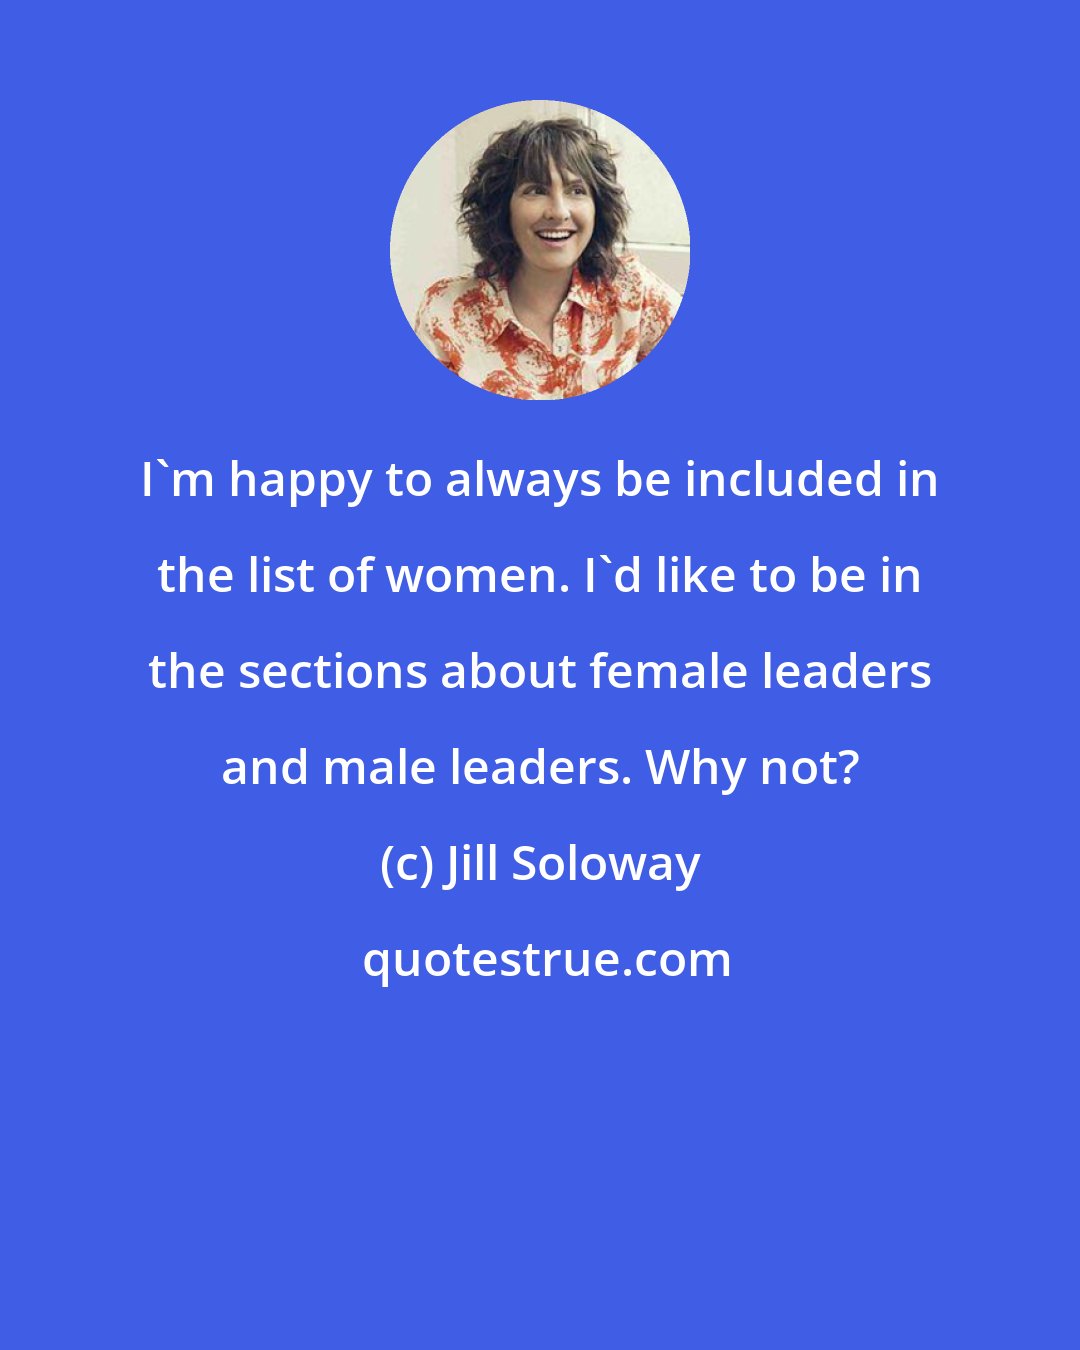 Jill Soloway: I'm happy to always be included in the list of women. I'd like to be in the sections about female leaders and male leaders. Why not?